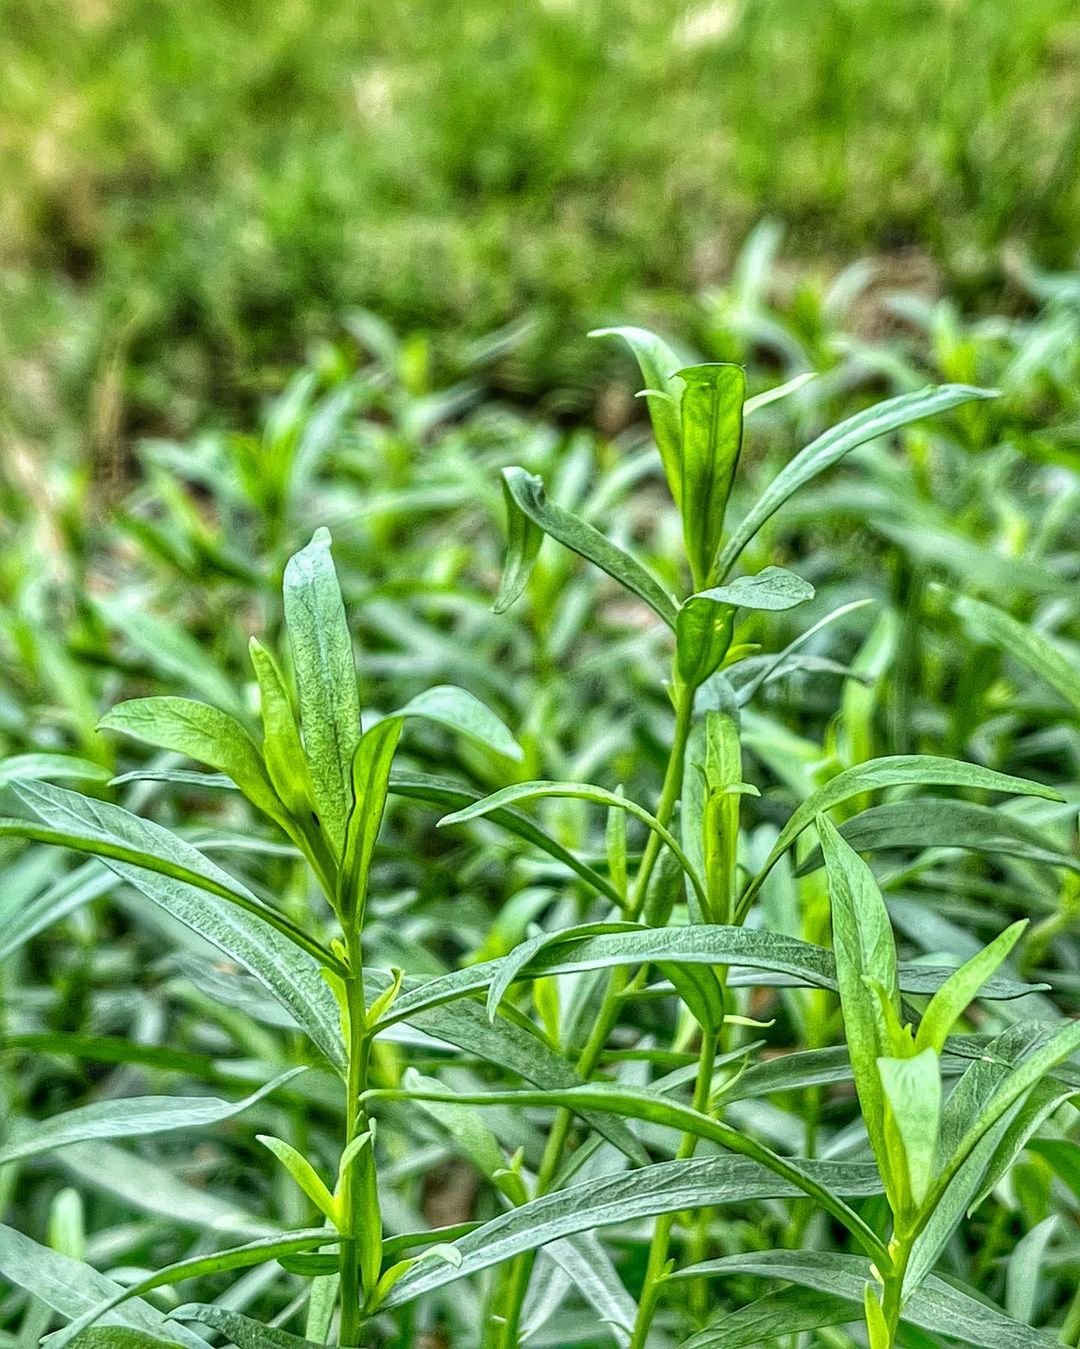 A close-up of vibrant green plants, including Tarragon, showcasing their lush foliage and natural beauty.